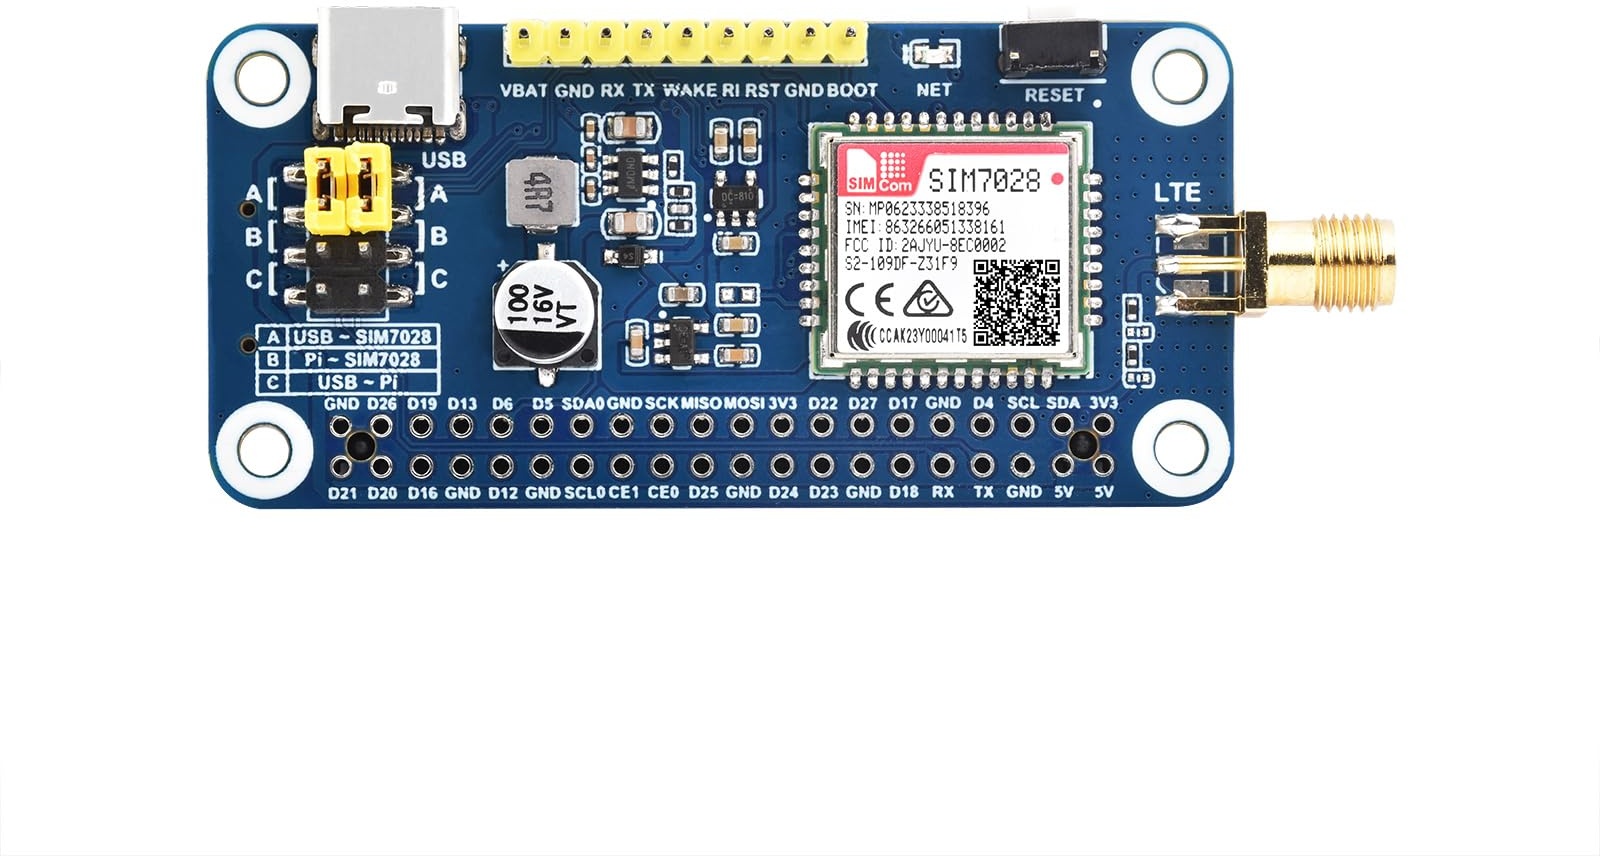 Waveshare SIM7028 NB-IoT HAT for Raspberry Pi/Jetson Nano, Supports Global Band NB-IoT Communication, Small in Size and Low Power Consumption, Onboard 40PIN GPIO Header, with GSM Antenna